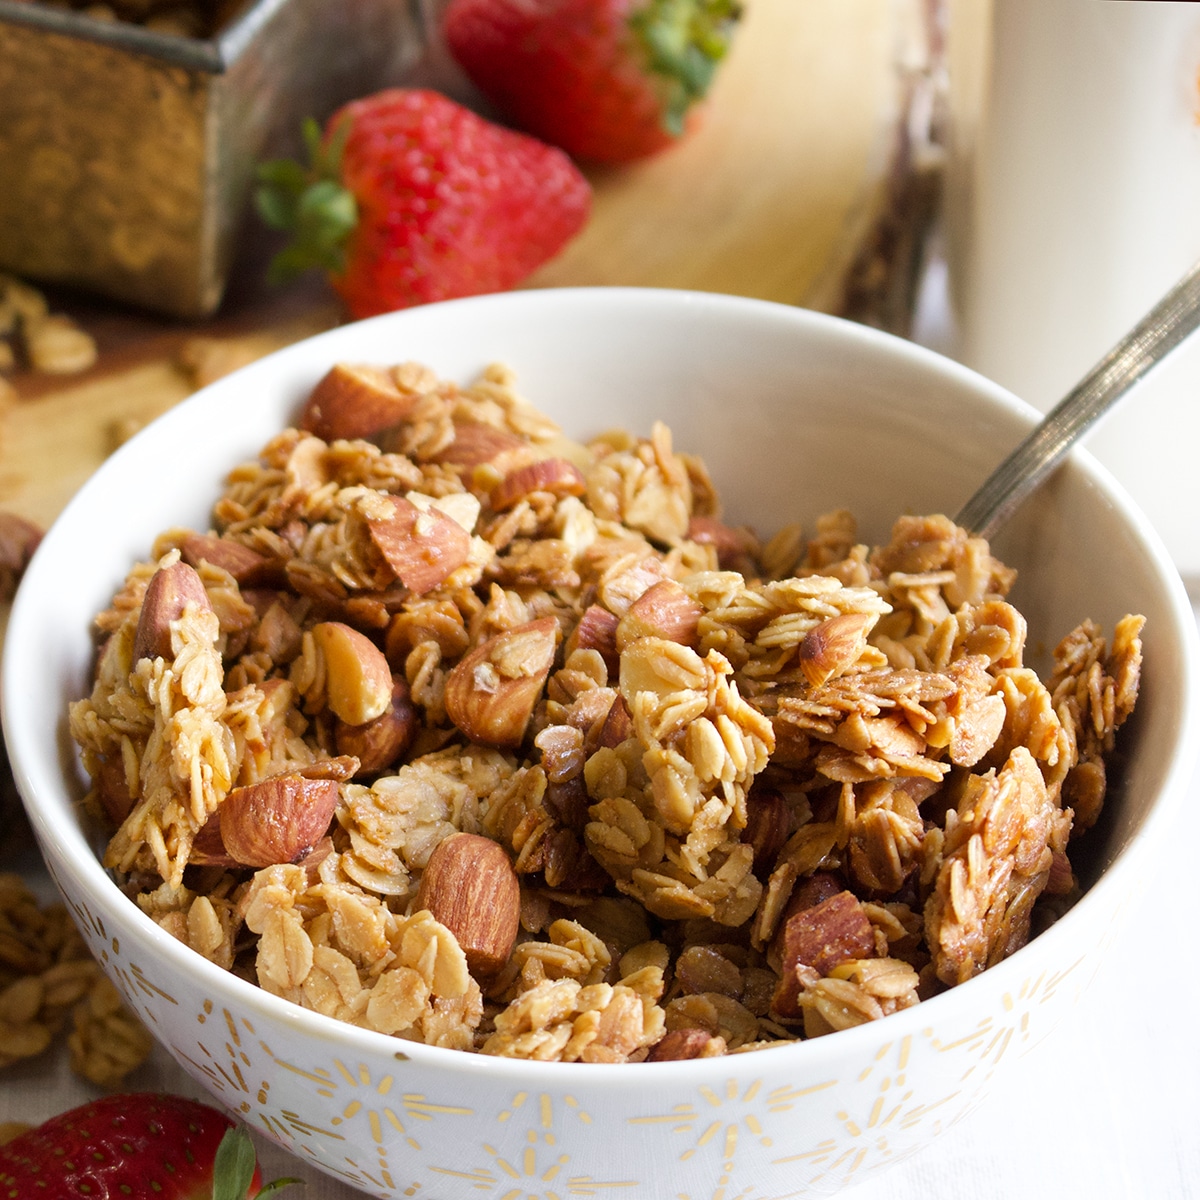 A bowl filled with homemade granola, with milk and fresh strawberries in the background.